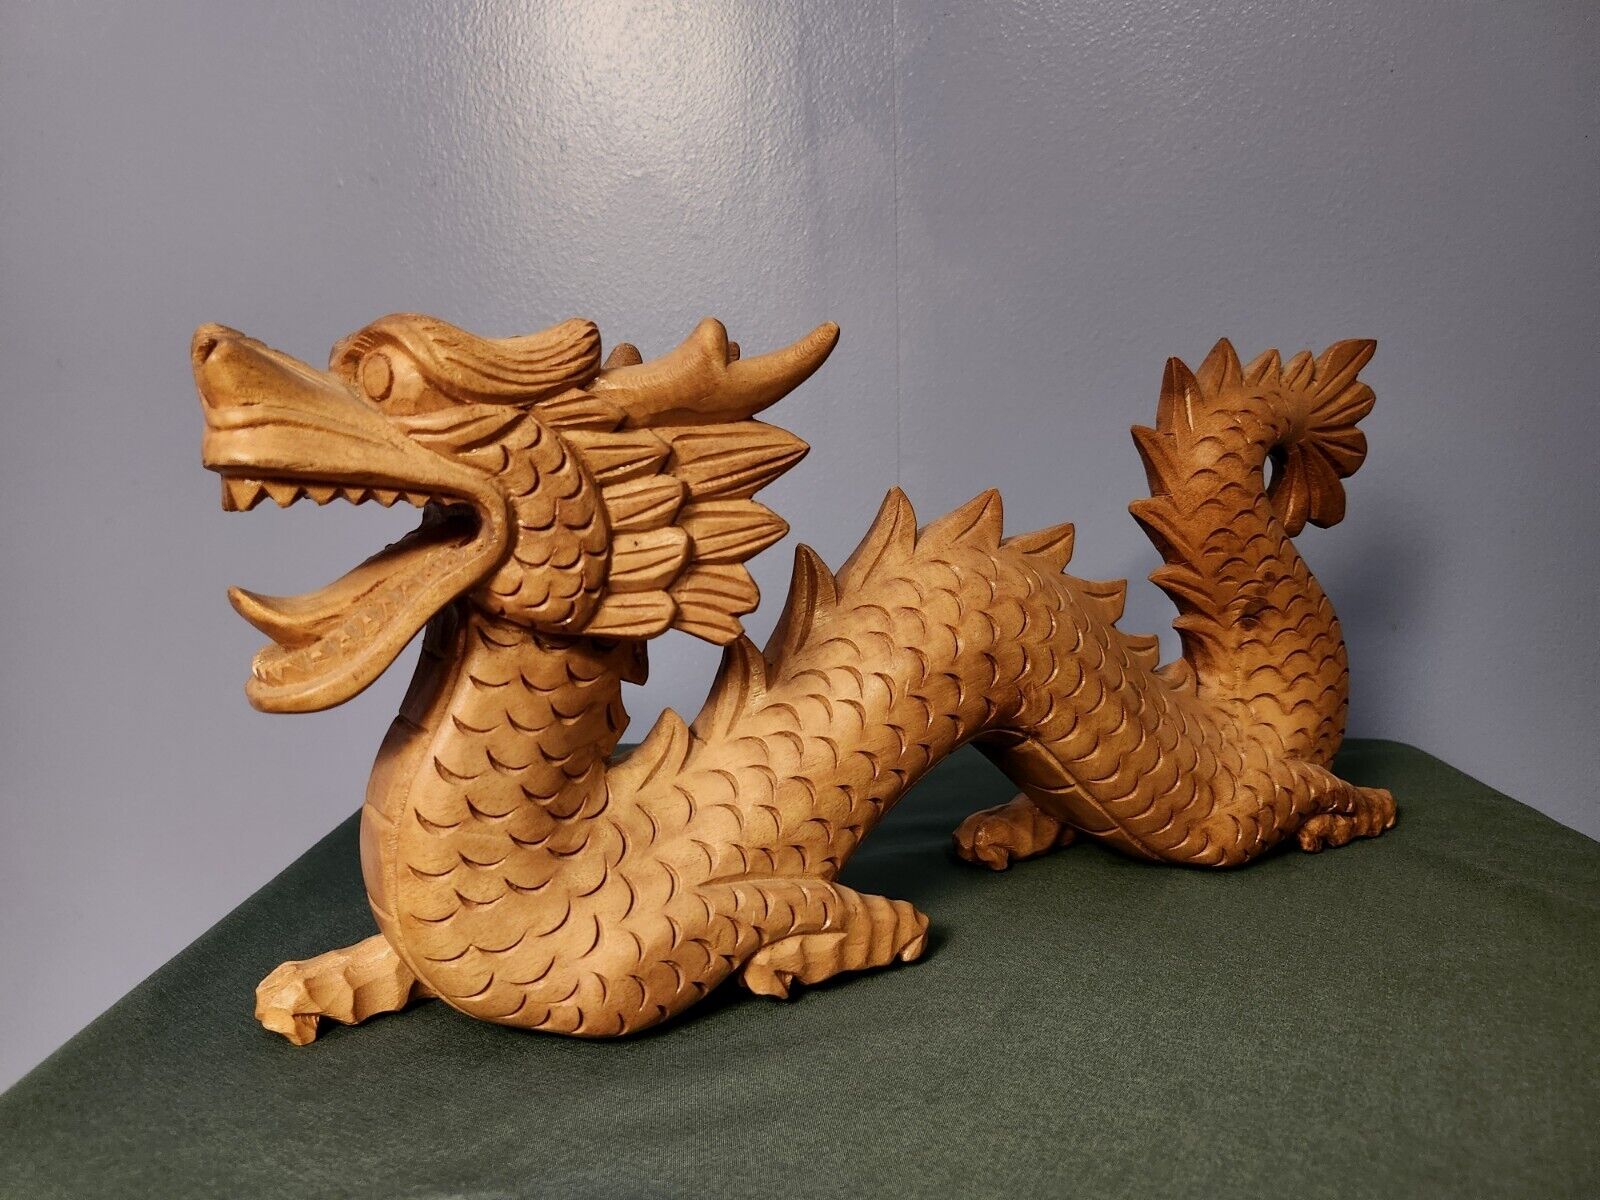 Chinese Wooden Dragon Large Statue 15 Inches Handmade